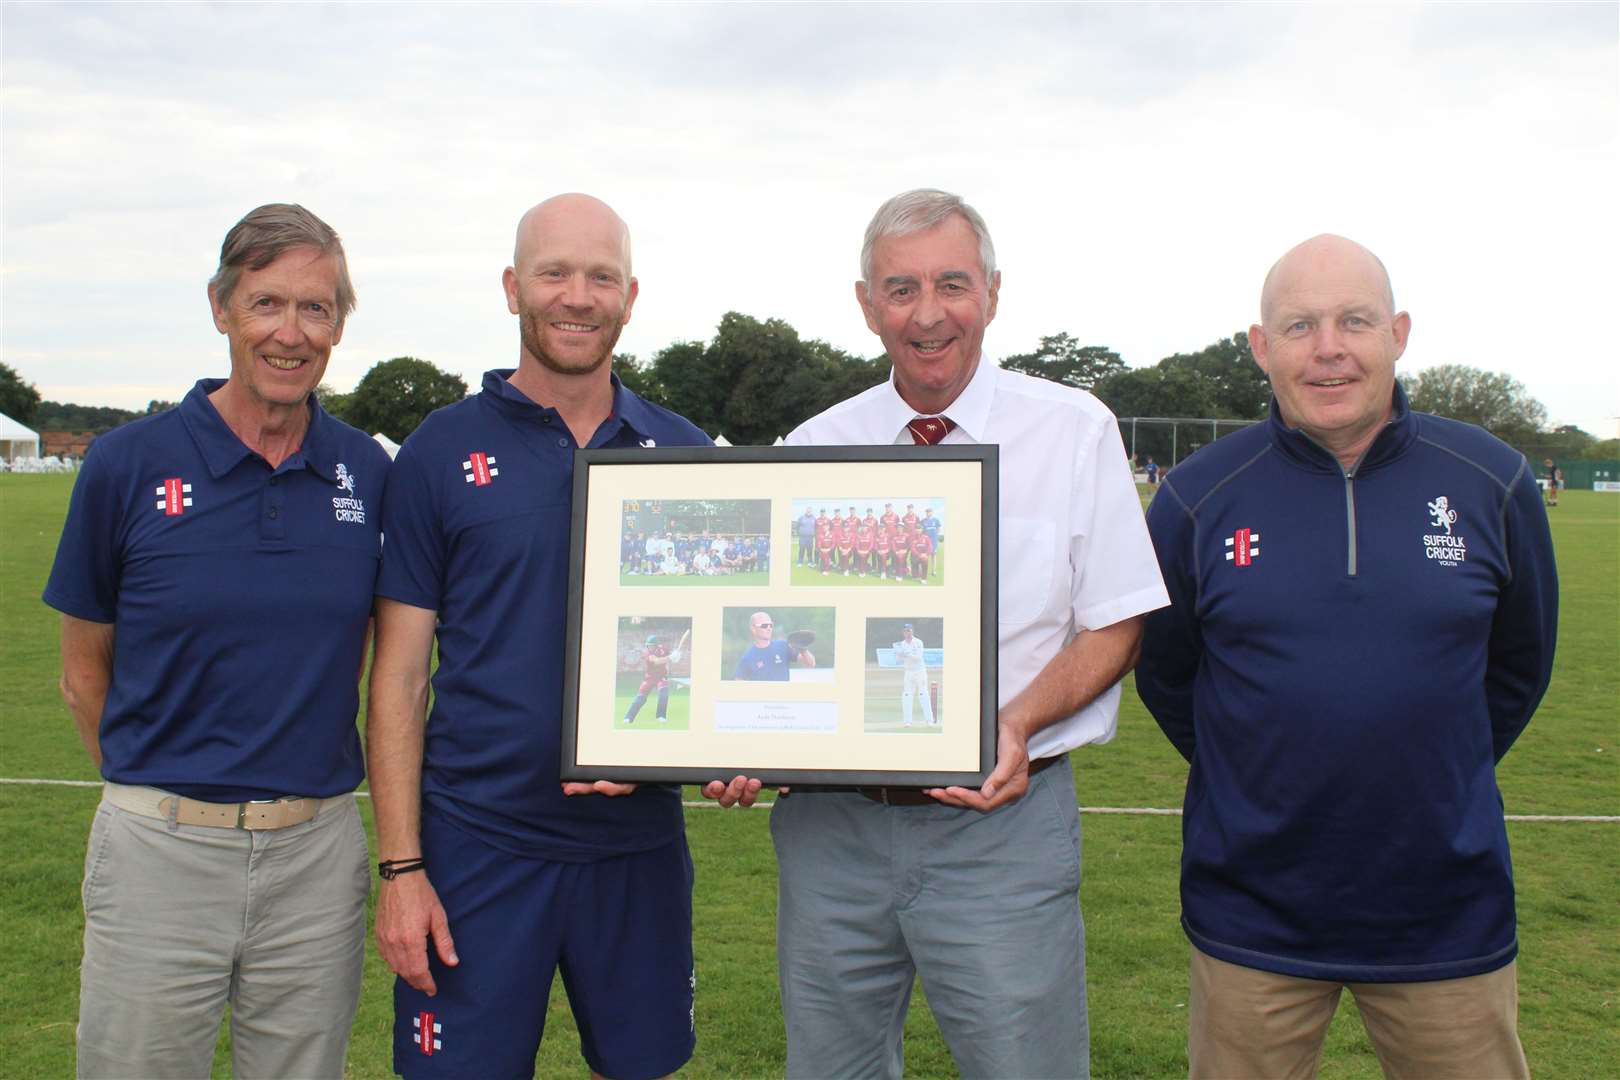 Andy Northcote (second left) is pictured with (left to right) Suffolk Secretary Toby Pound, Suffolk President Tony Warrington and Suffolk Chair Andrew Squire. Picture: Nick Garnham